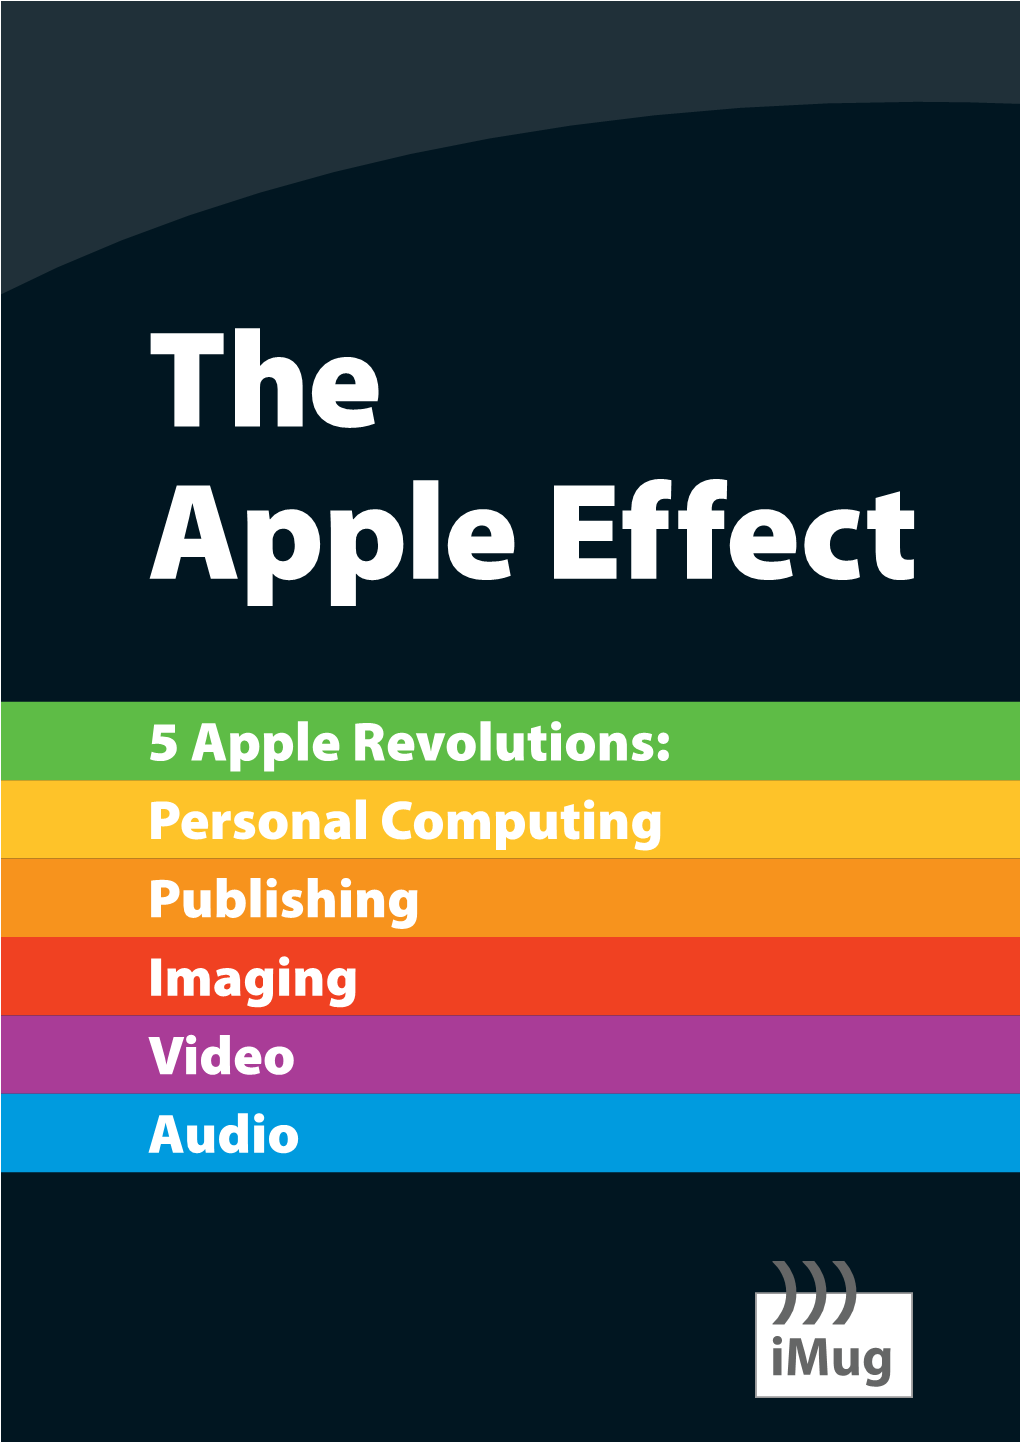 The Apple Effect